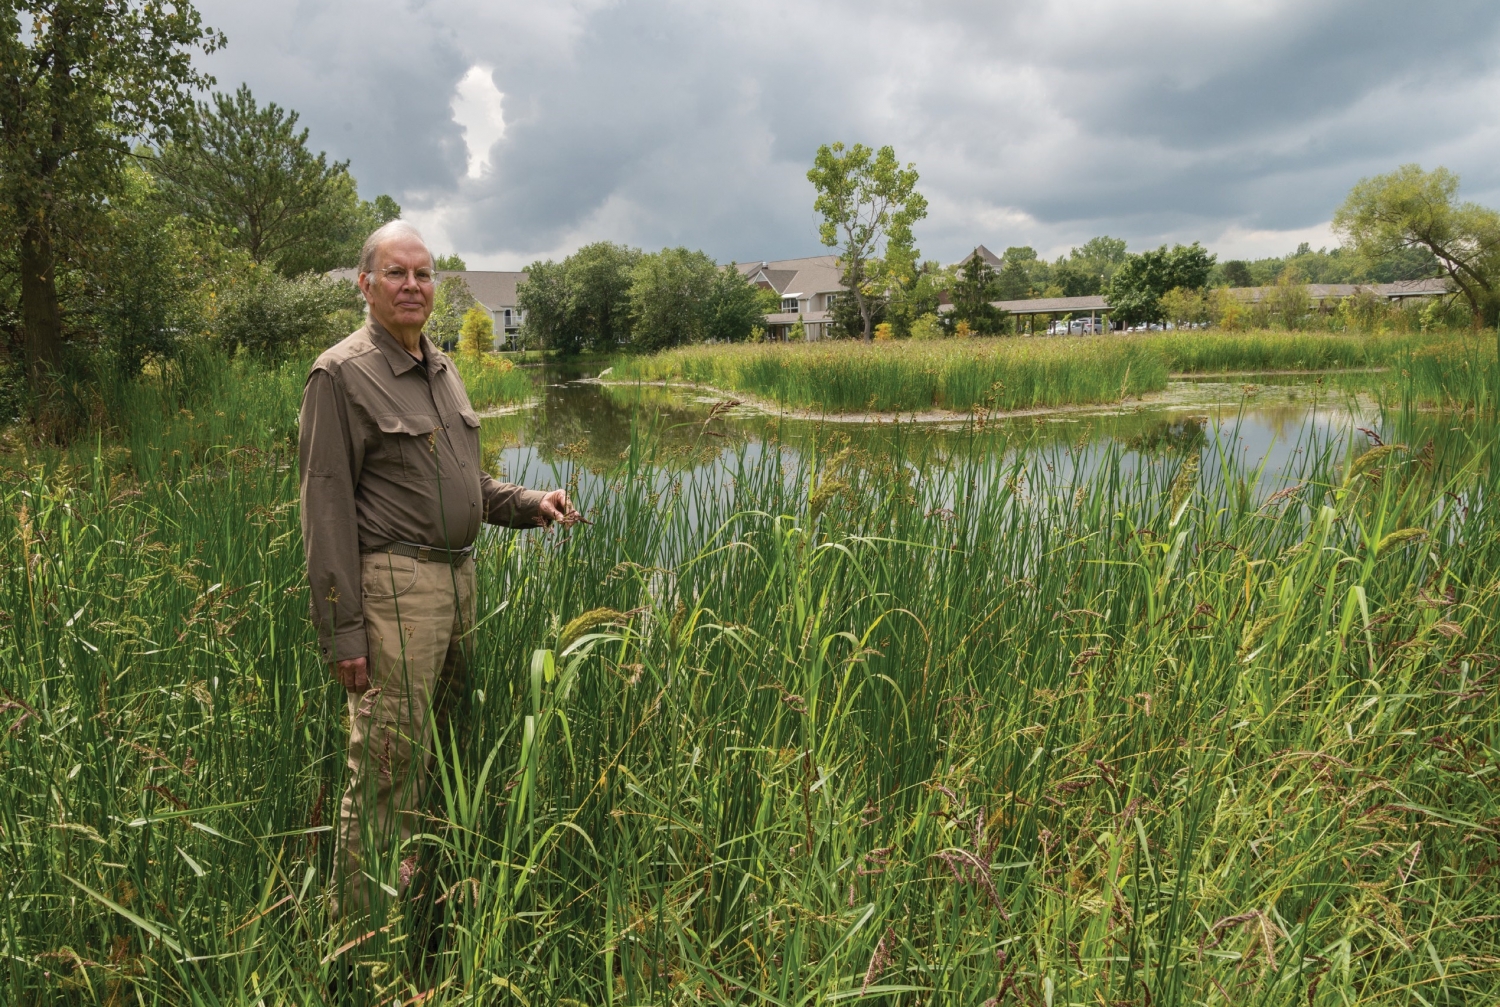 Great Outdoors: Dr. Alan Lockwood  seen near his home in Oberlin, Ohio, believes doctors have a duty to advocate for solutions to climate change. Photo credit: Linda Grashoff